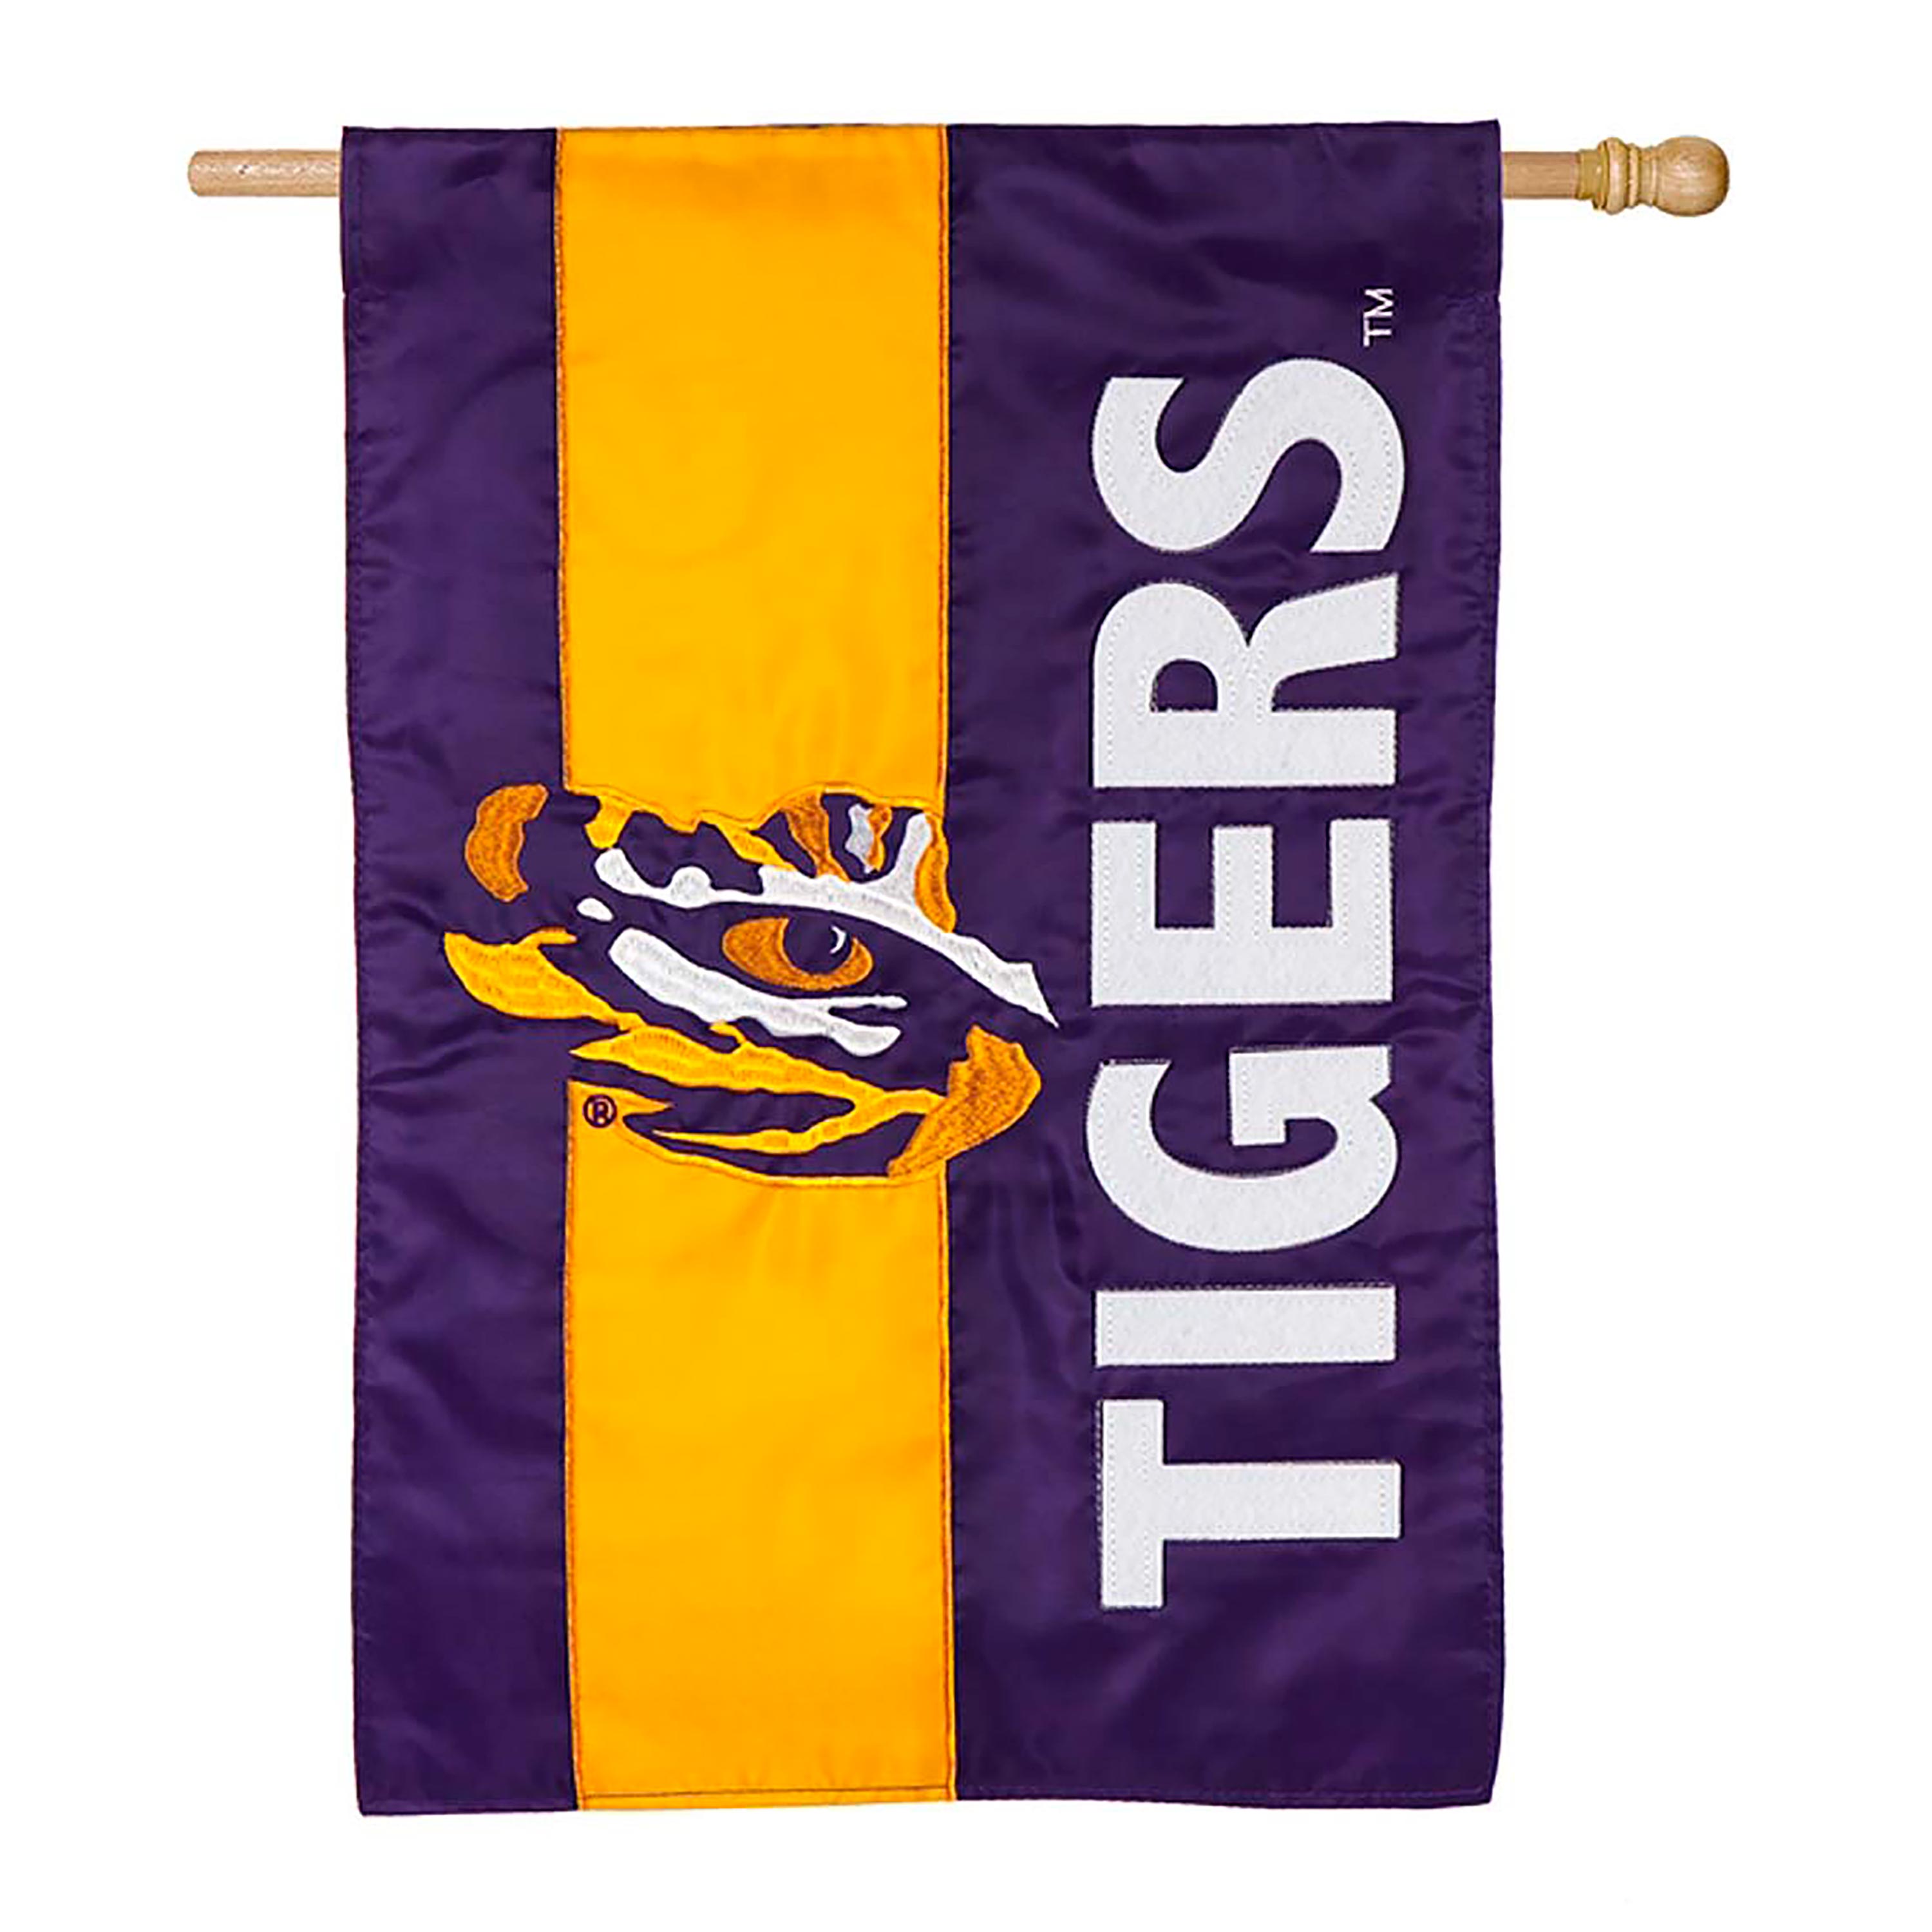 Double-Sided Embellished College Team Pride Applique House Flag - LSU